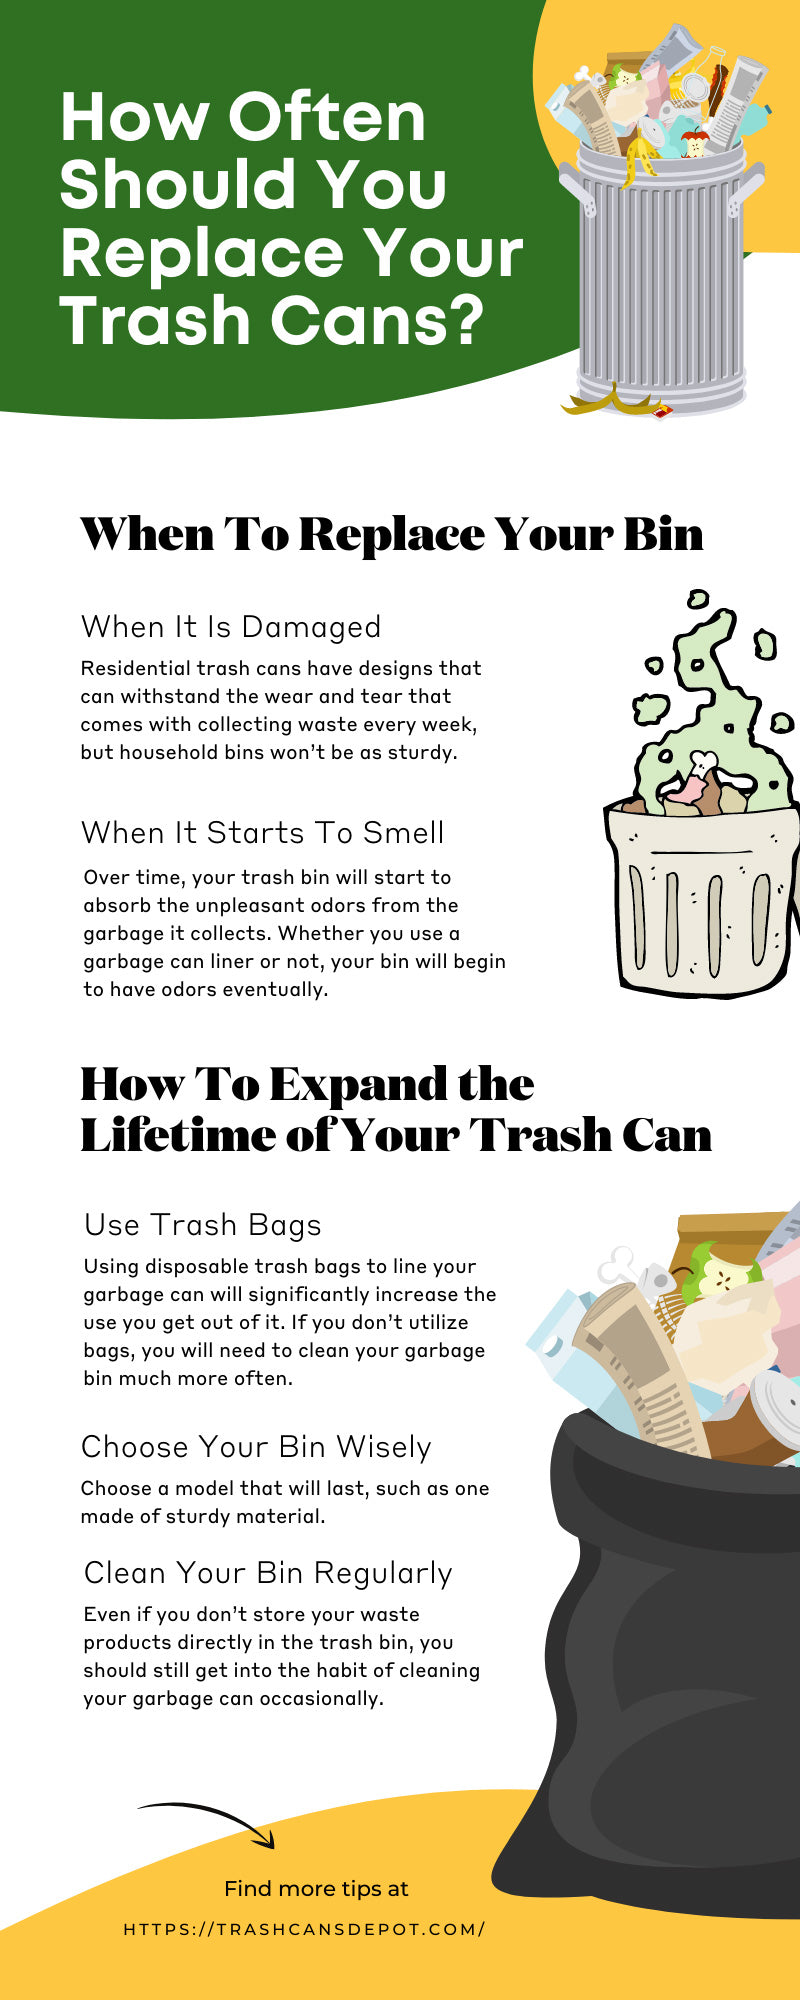 How Often Should You Replace Your Trash Cans?